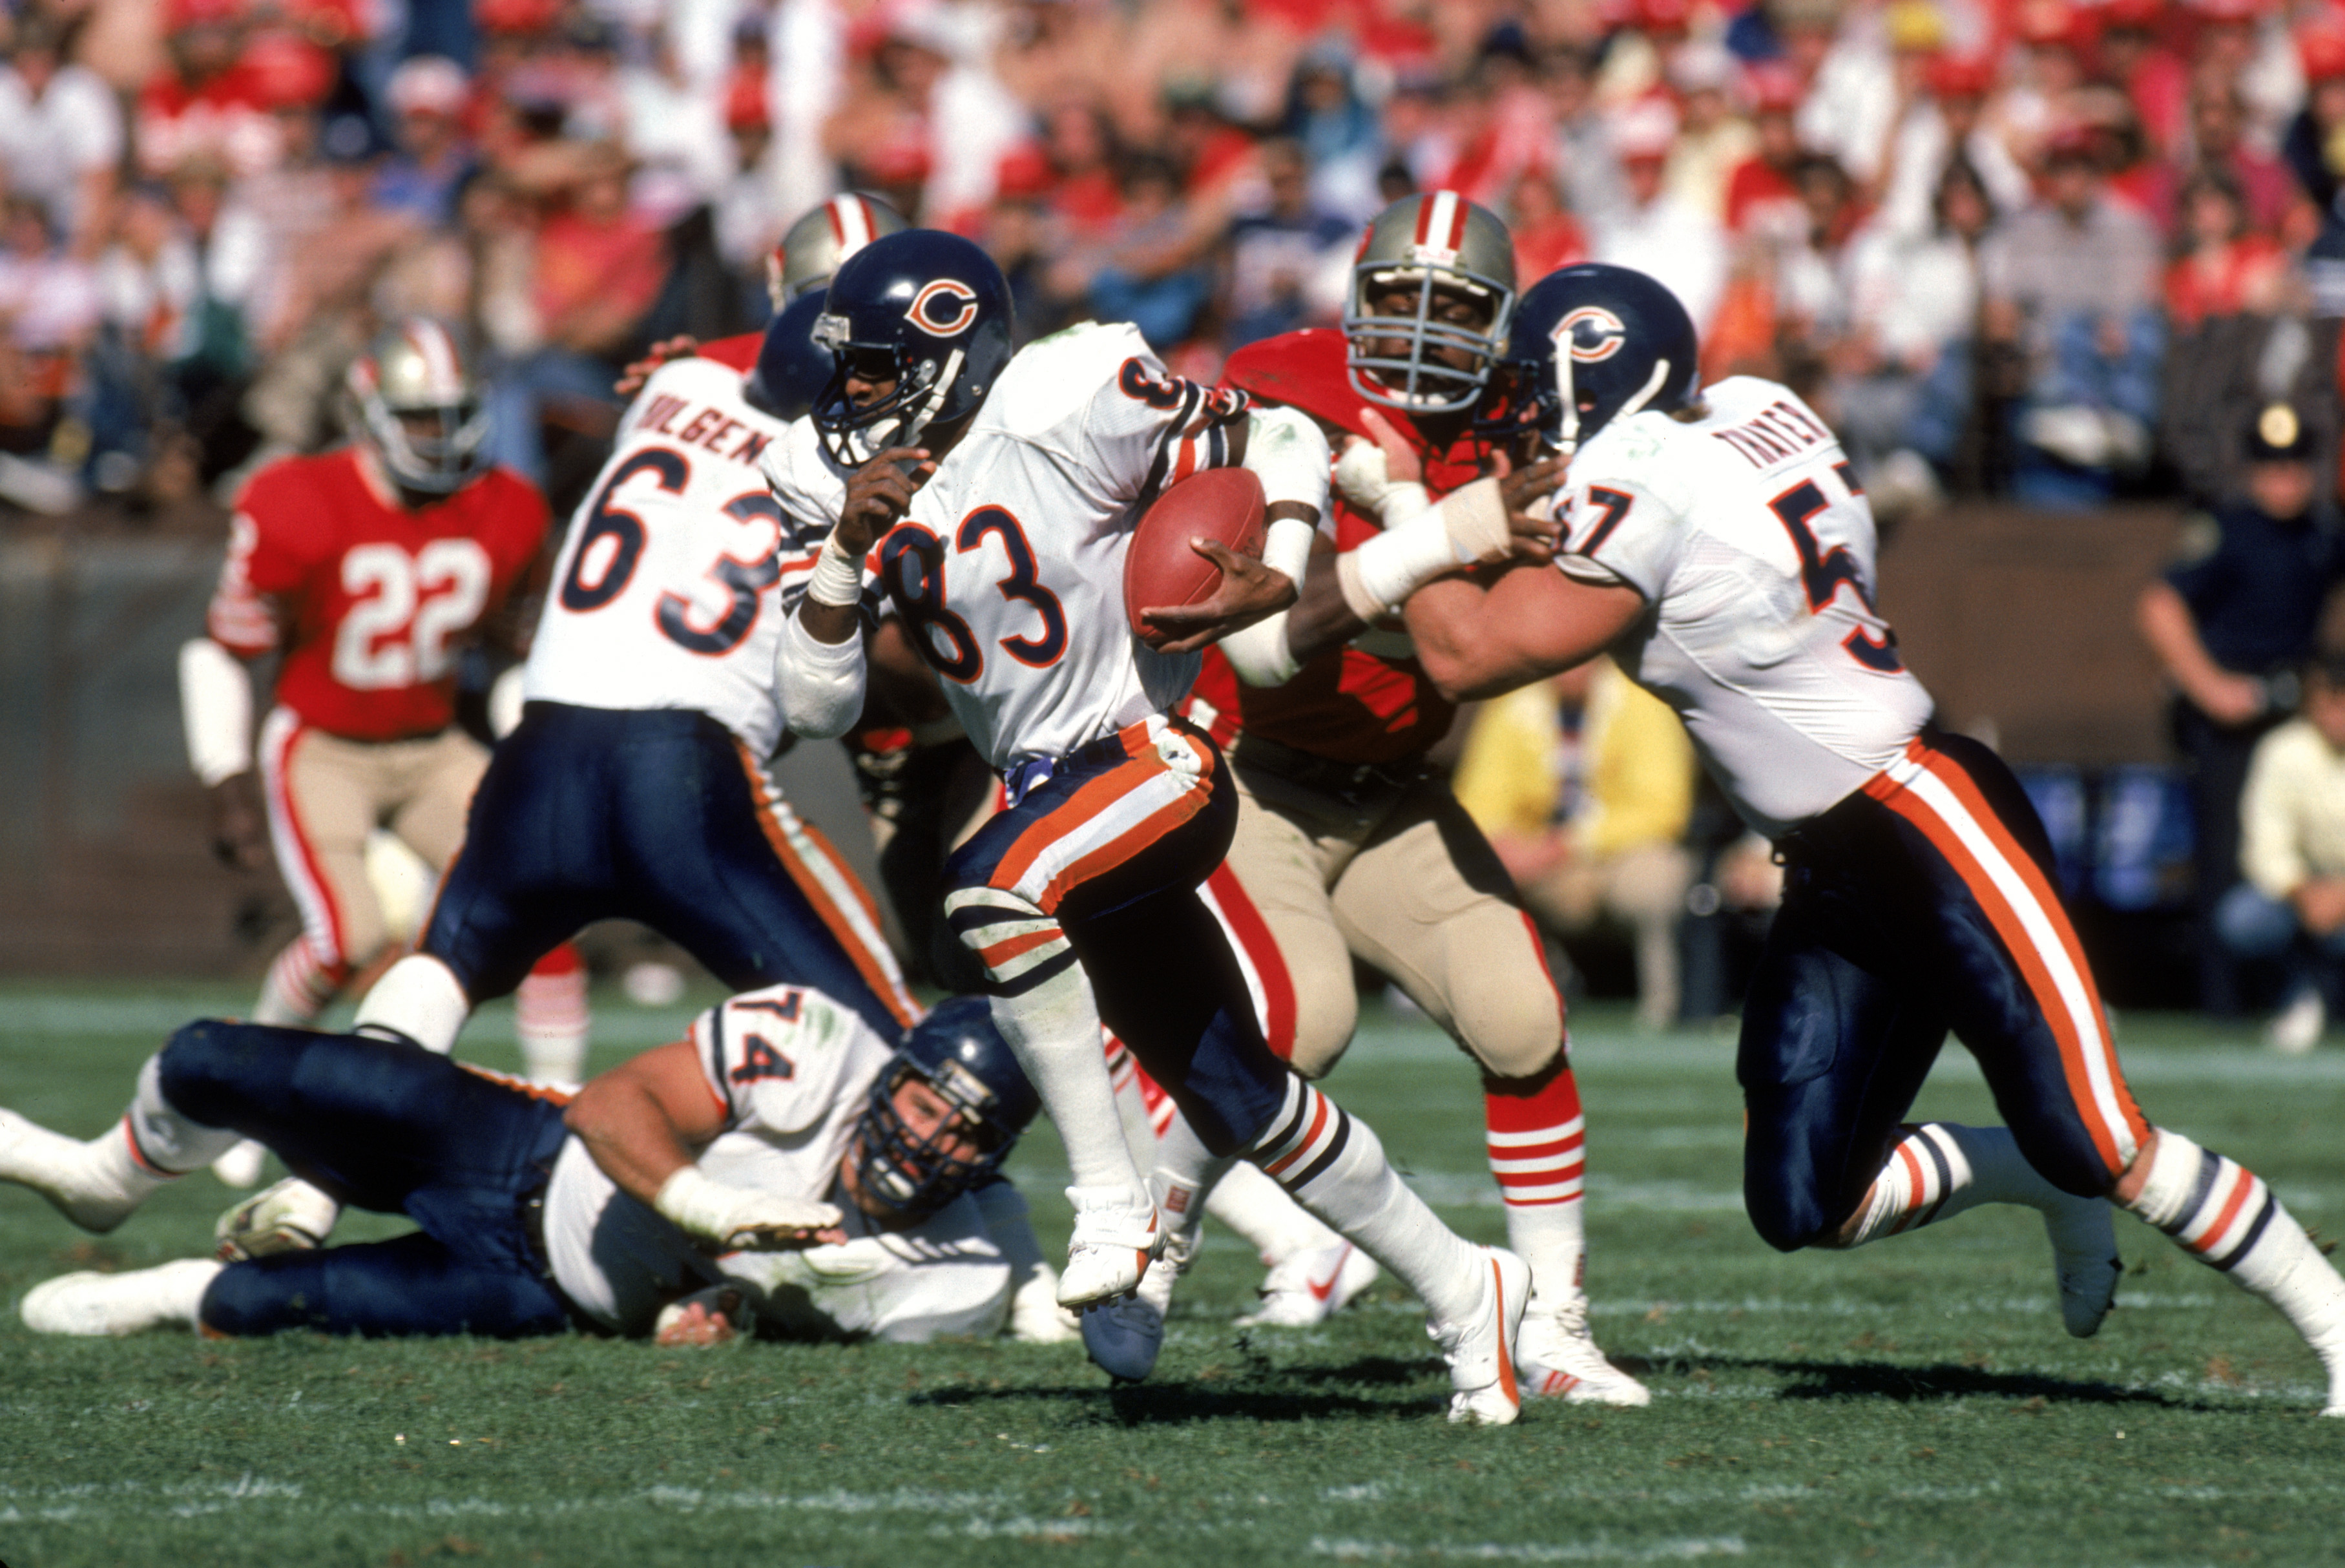 SAN FRANCISCO - OCTOBER 13:  Wide receiver Willie Gault #83 of the Chicago Bears hustles up field with the ball during a game against the San Francisco 49ers at Candlestick Park on October 13, 1985 in San Francisco, California.  The Bears won 26-10.   (Ph